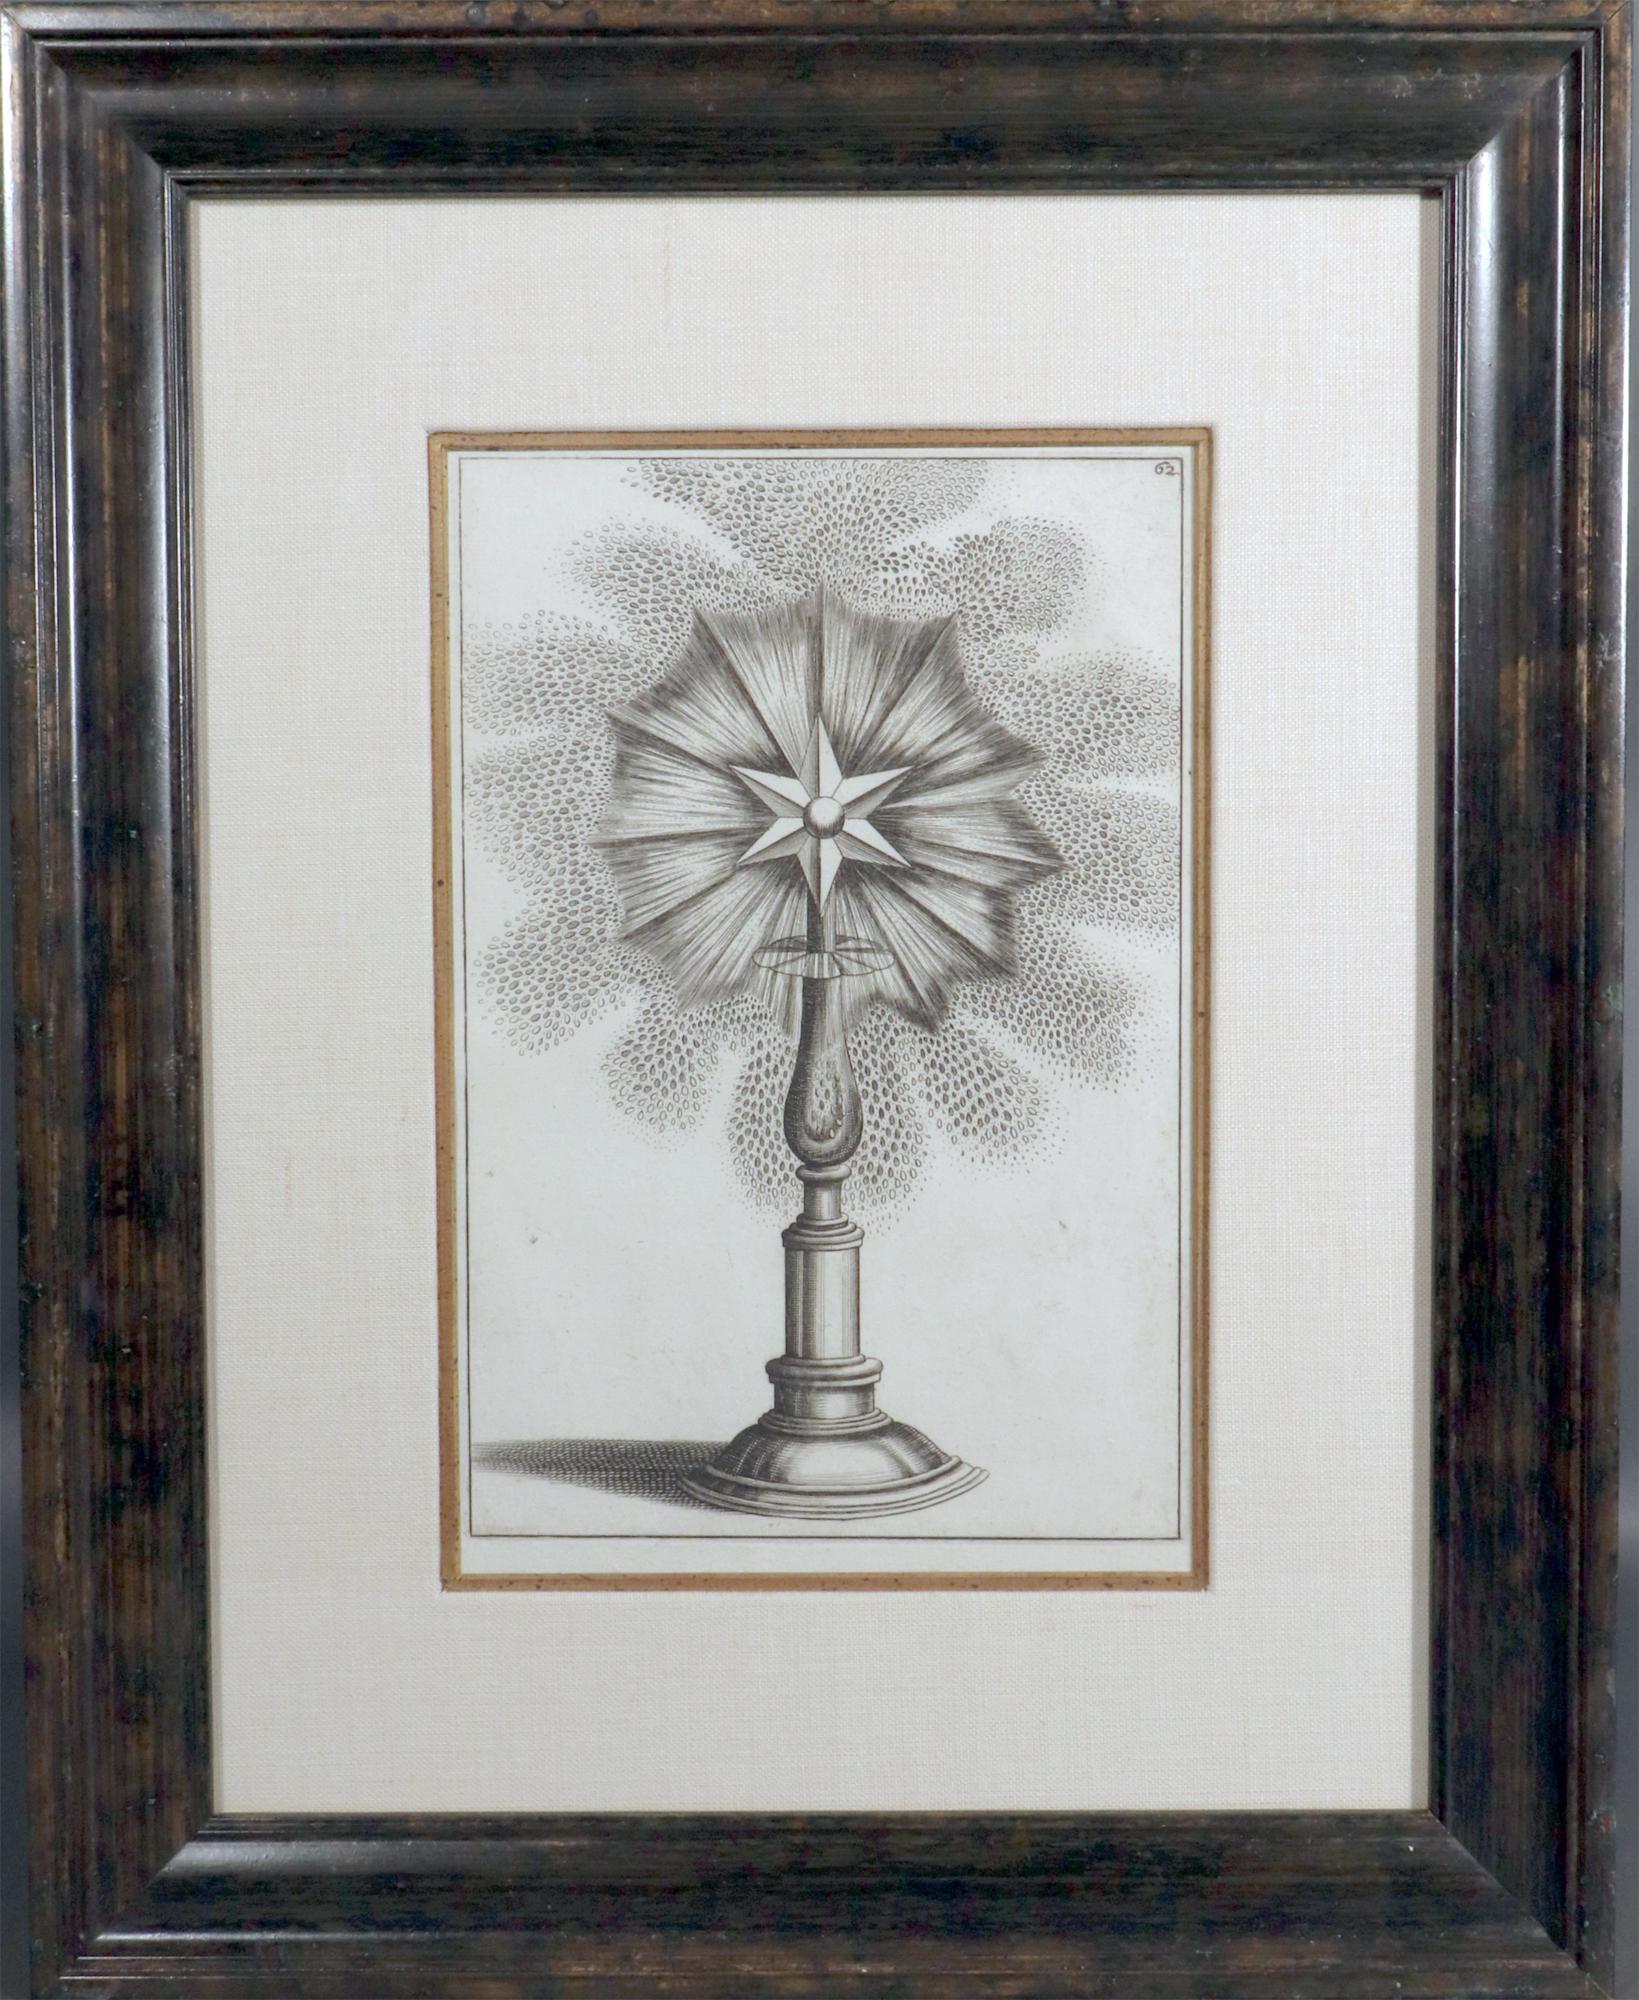 Paper Georg Andreas Bockler’s Engravings of Architectural Fountains for Formal Gardens For Sale